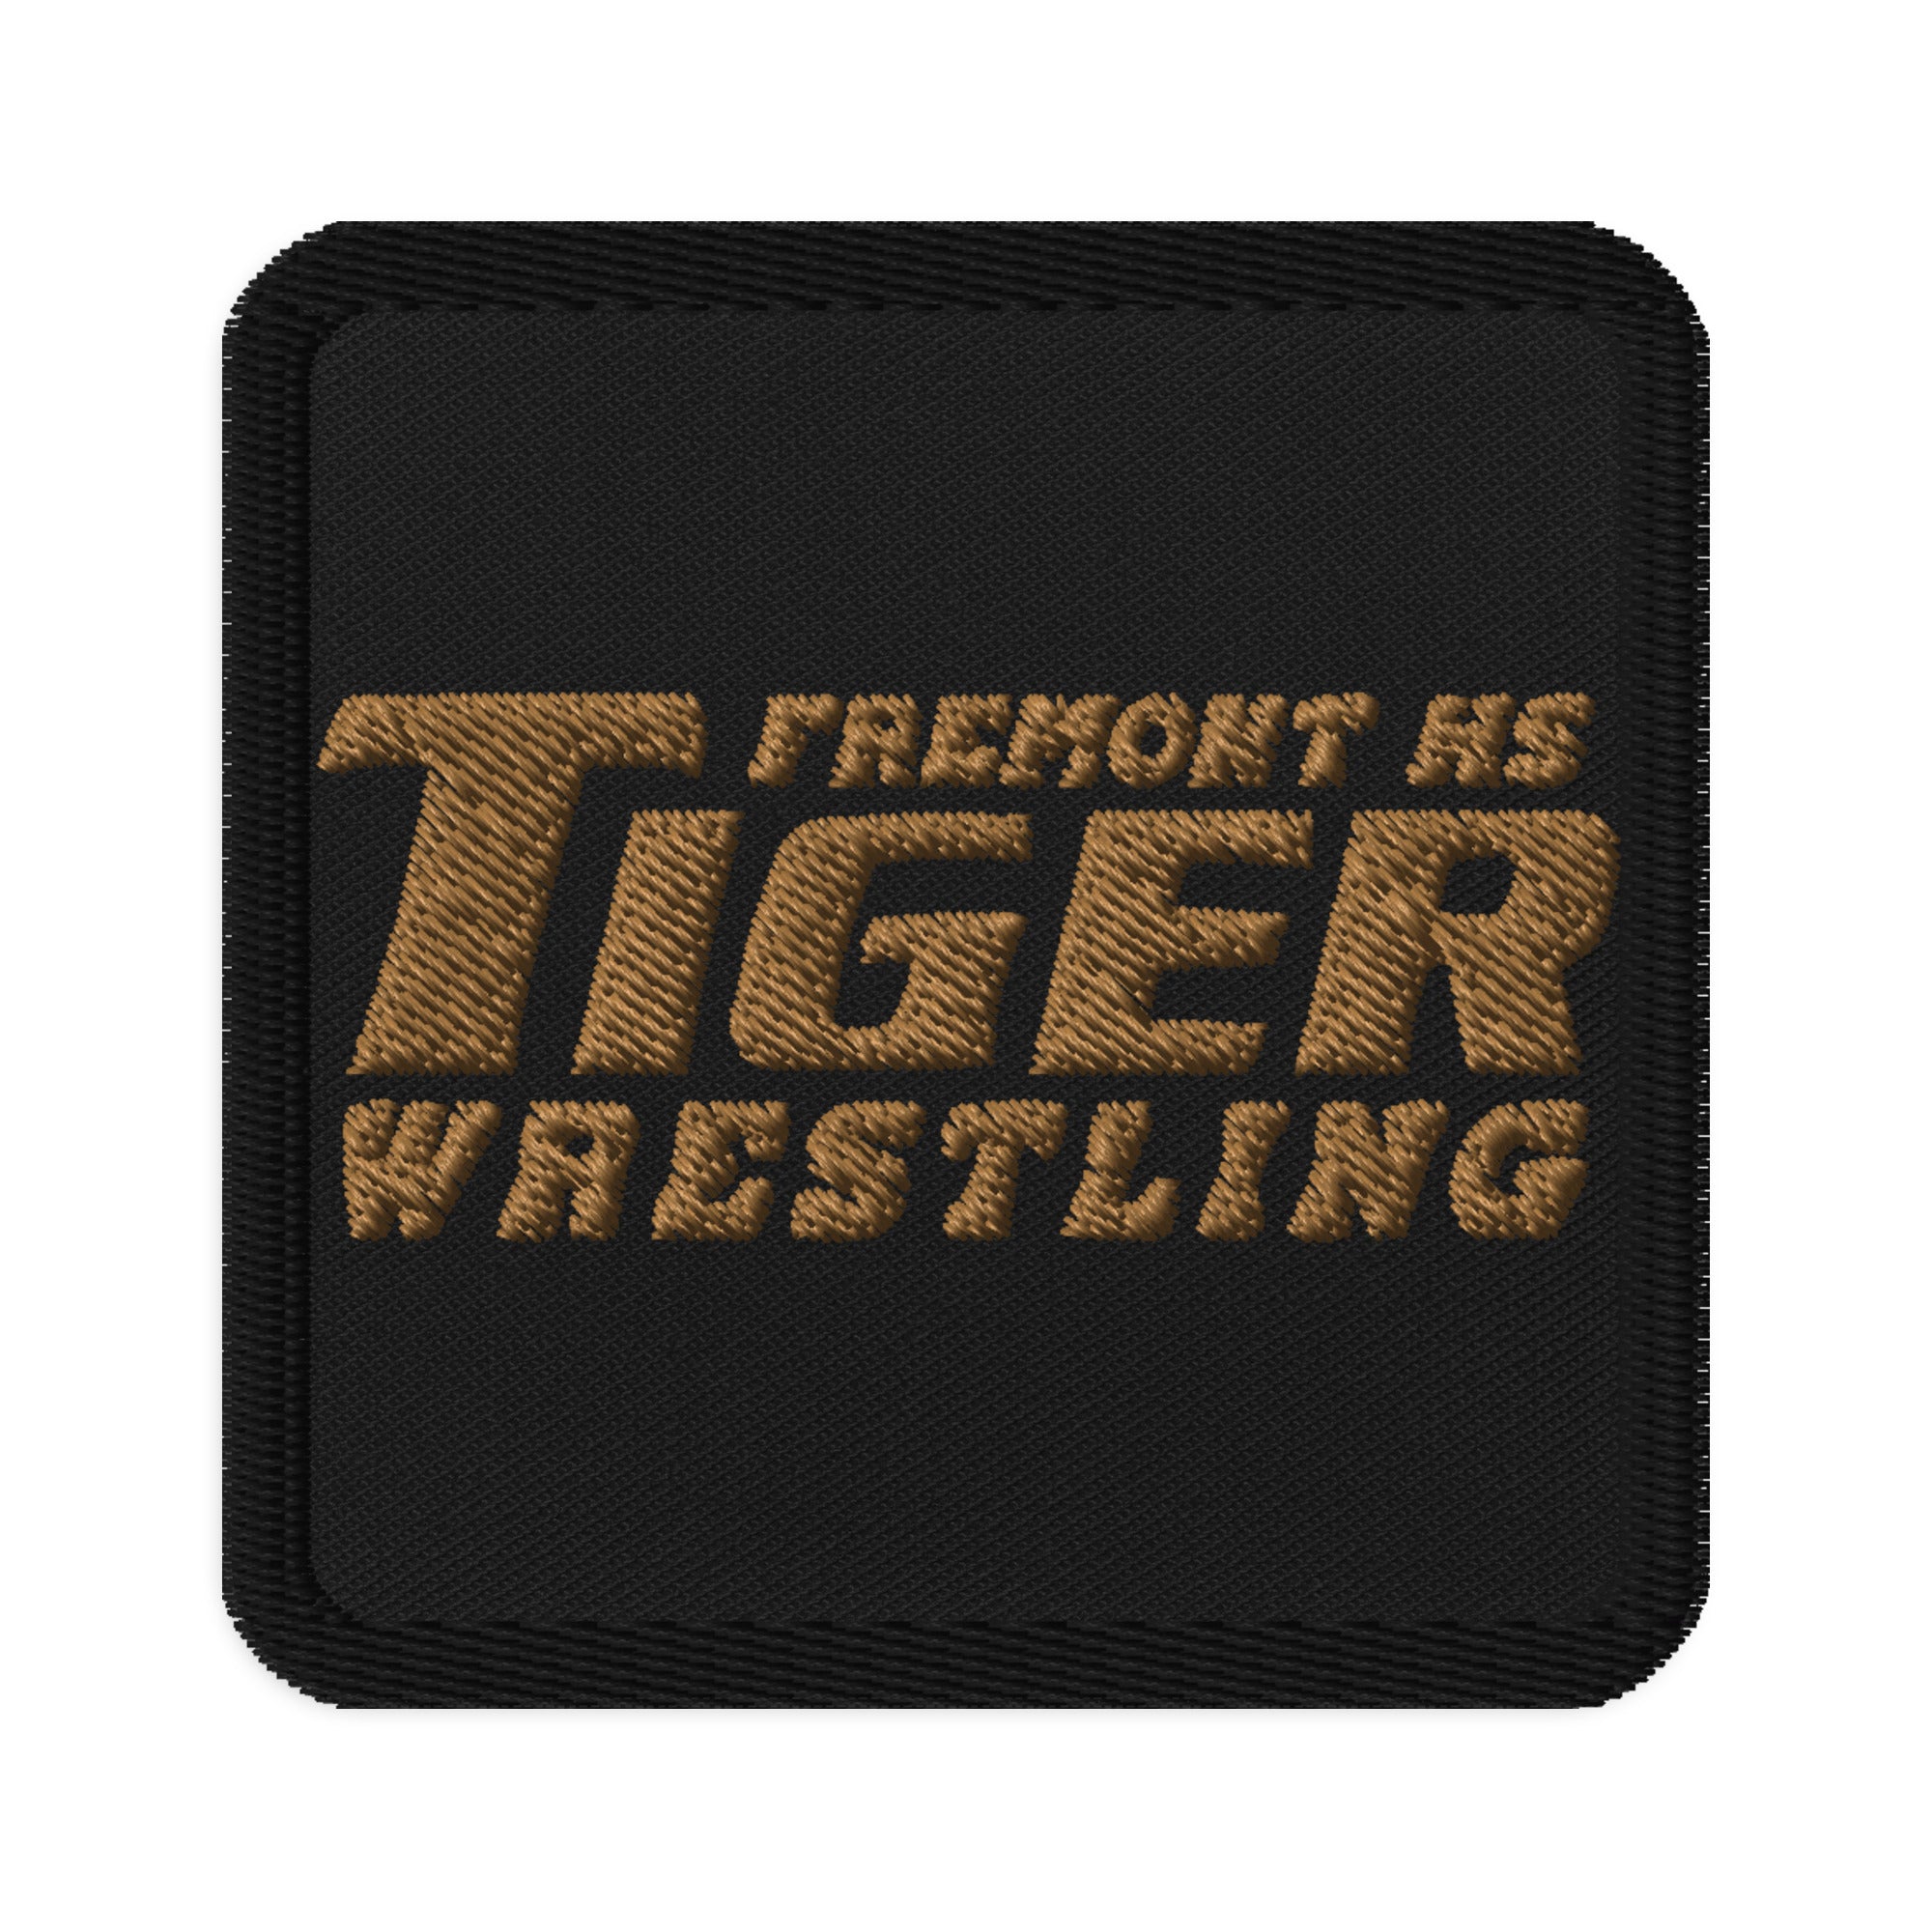 Fremont High School  Black Embroidered Patches